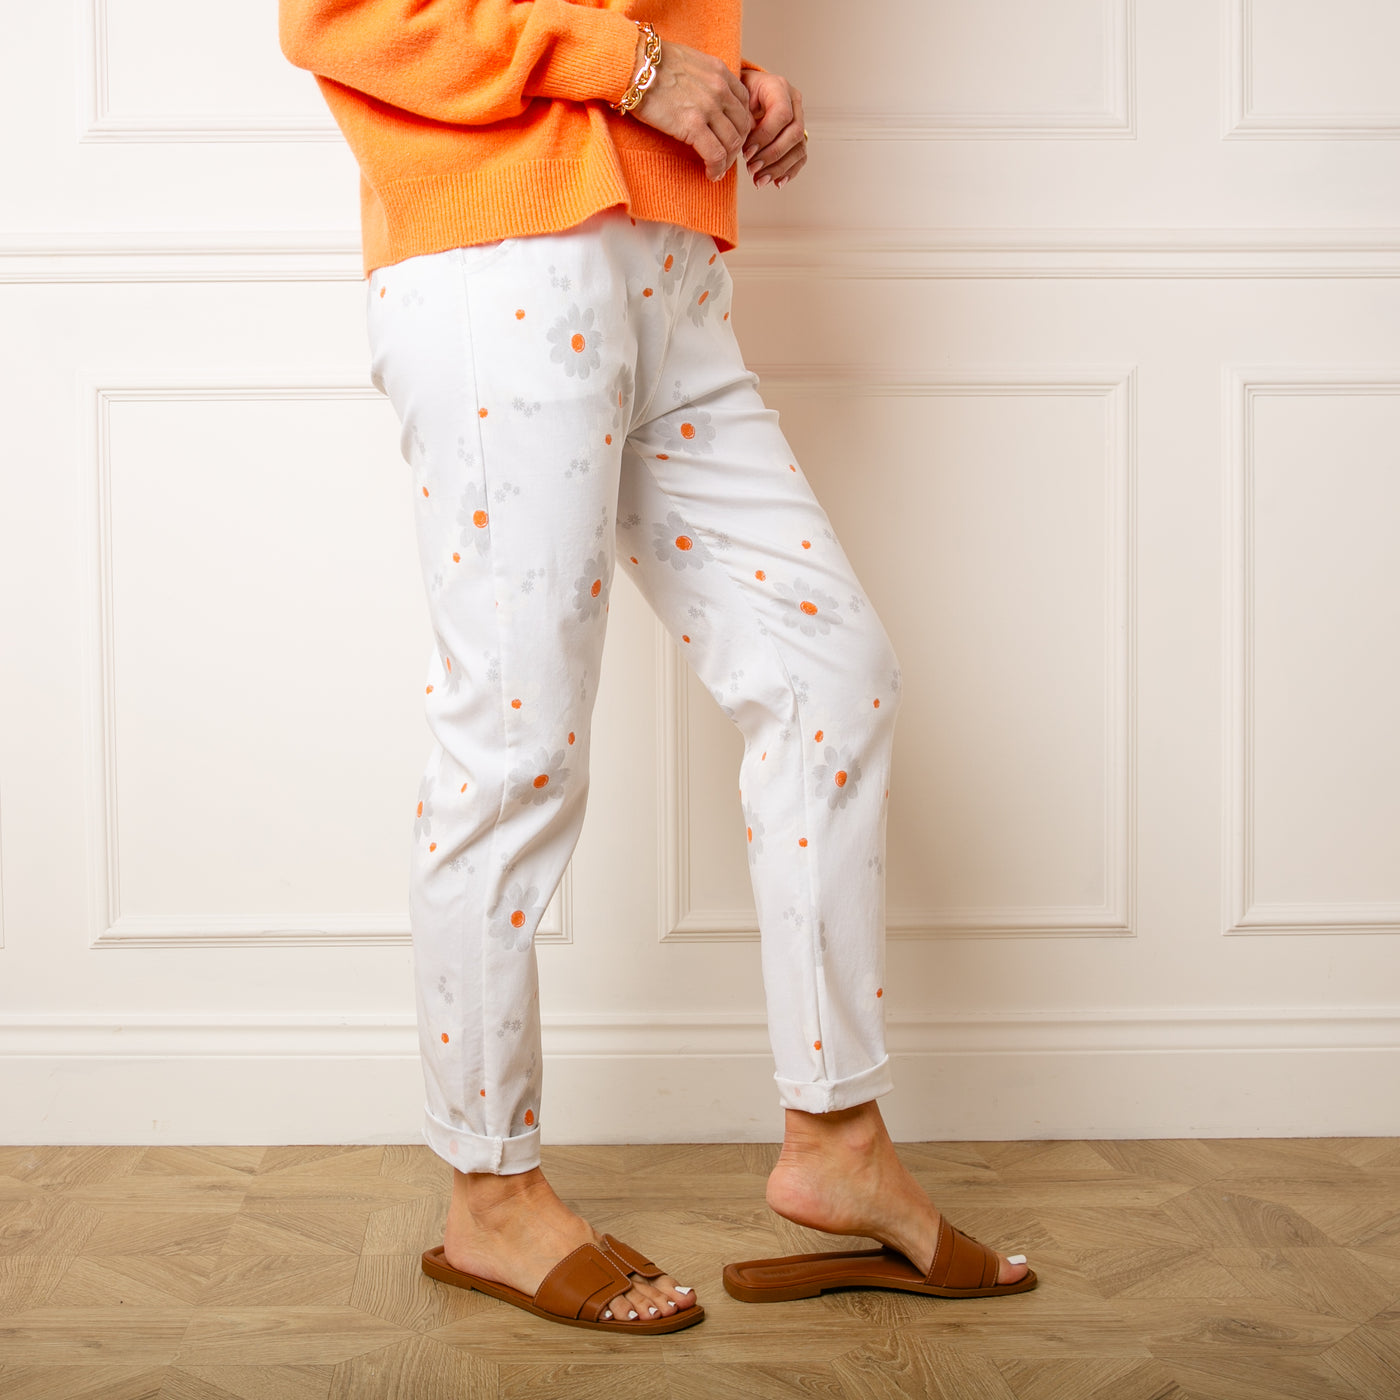 The white Slim Fit Floral Trousers made from a super stretchy blend of viscose nylon and spandex